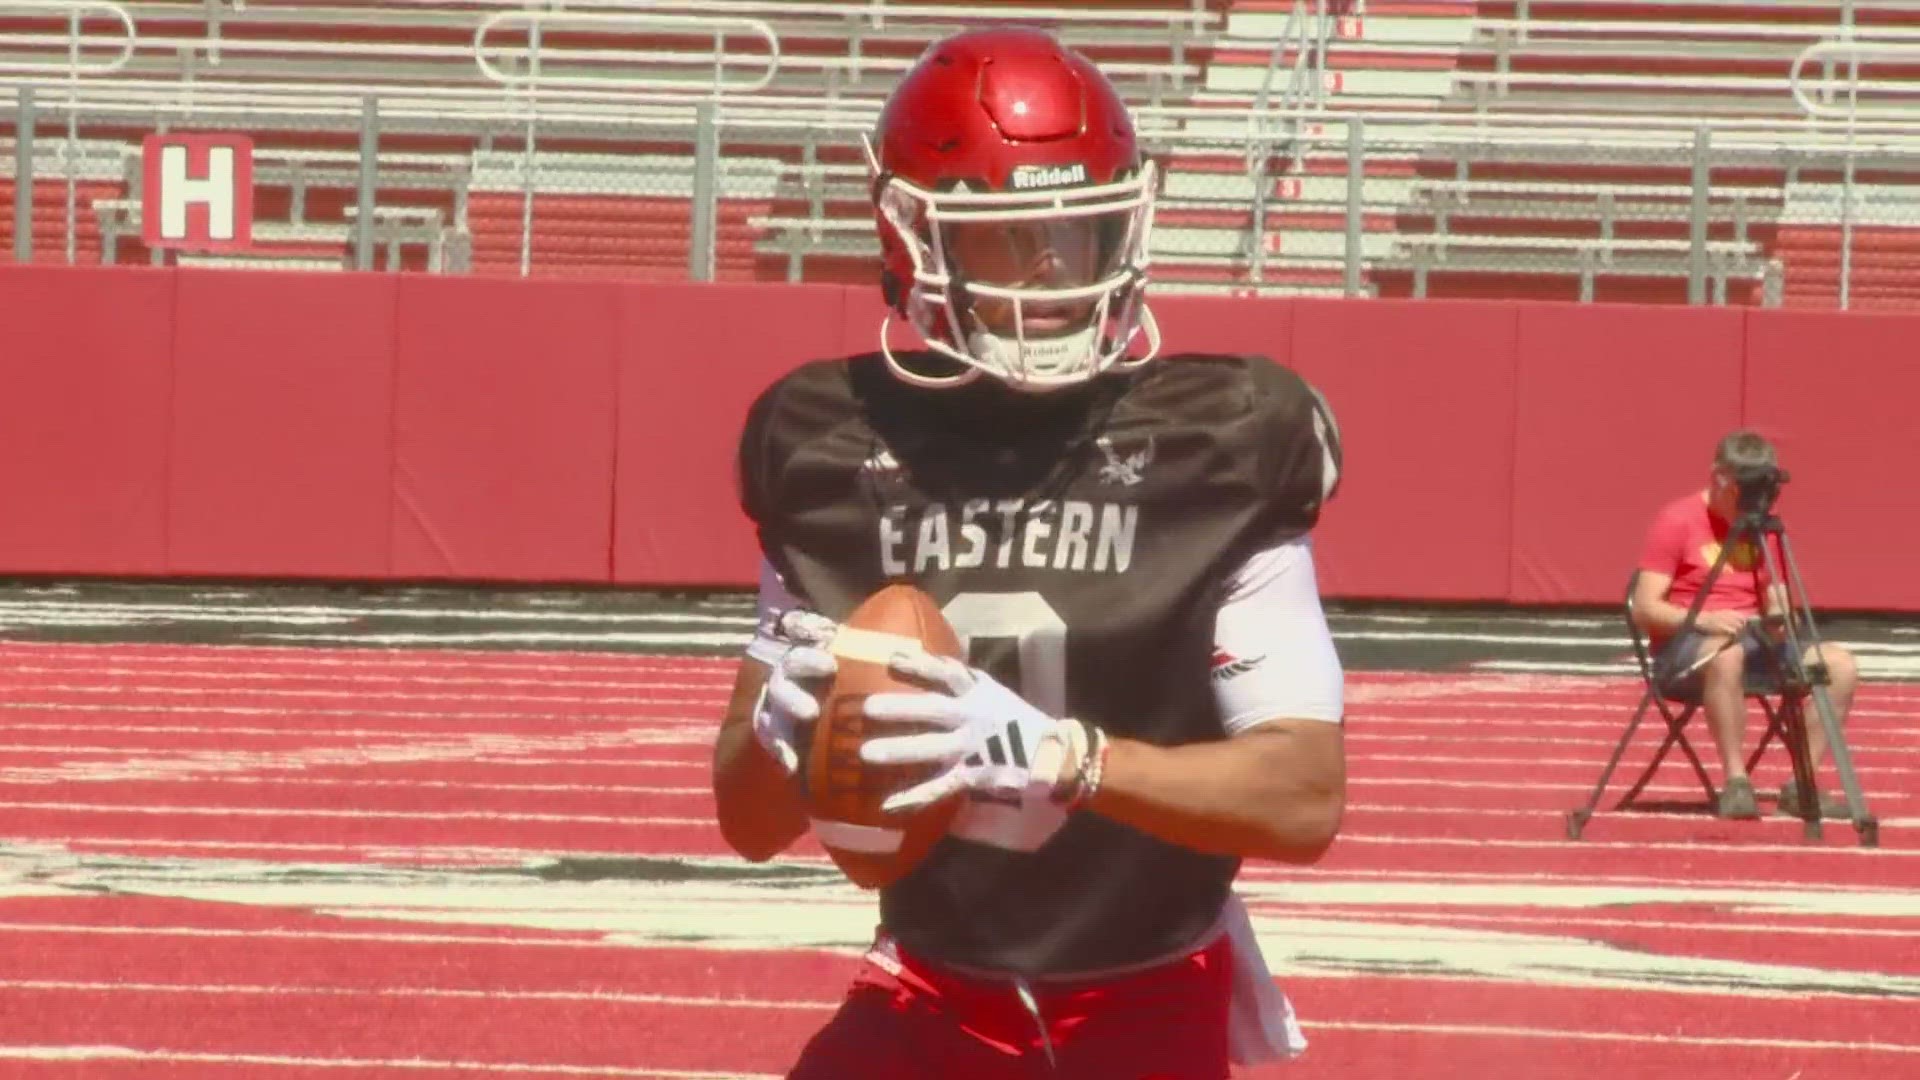 Eags hope to turn offseason work into week one upset over Bison.